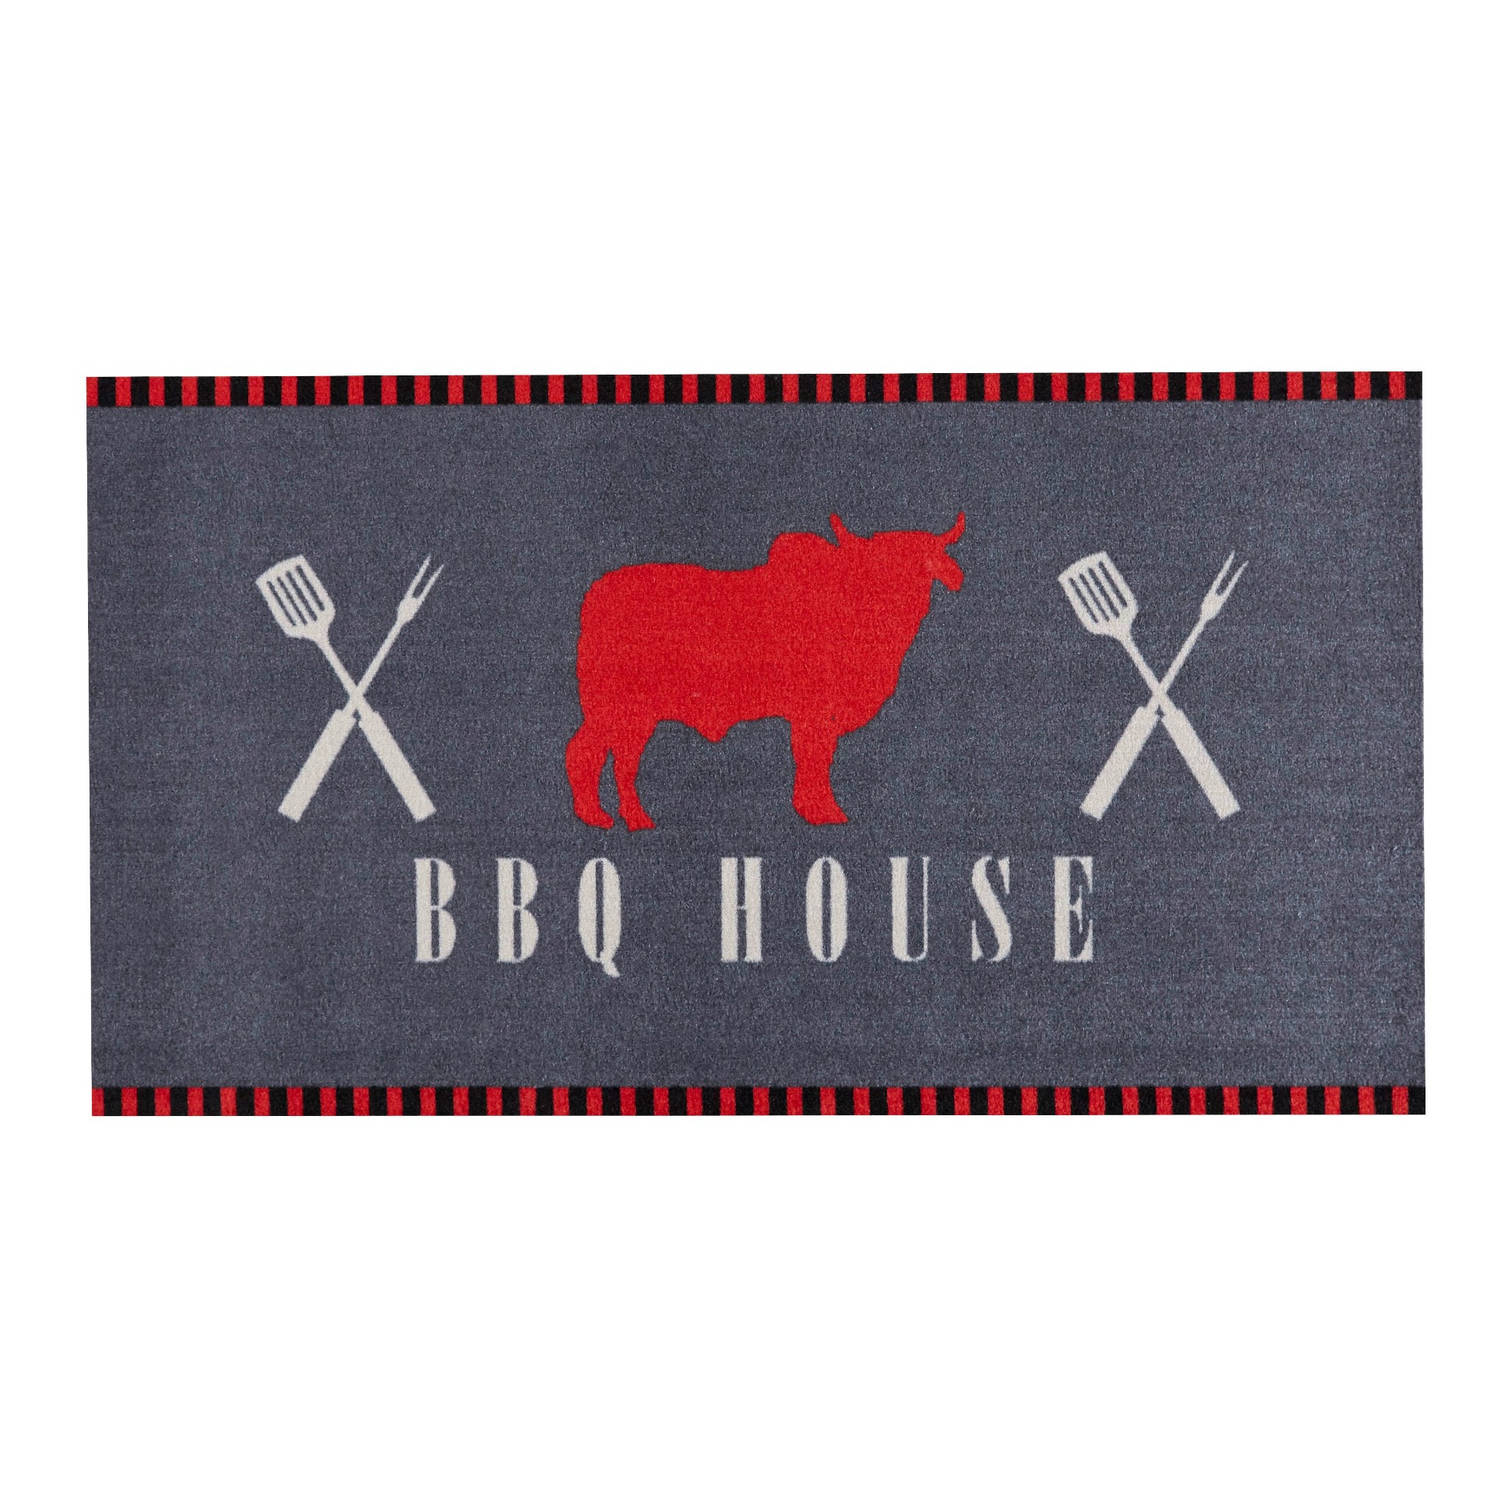 Md Entree Barbecue Mat Bbq House 67 X 120 Cm